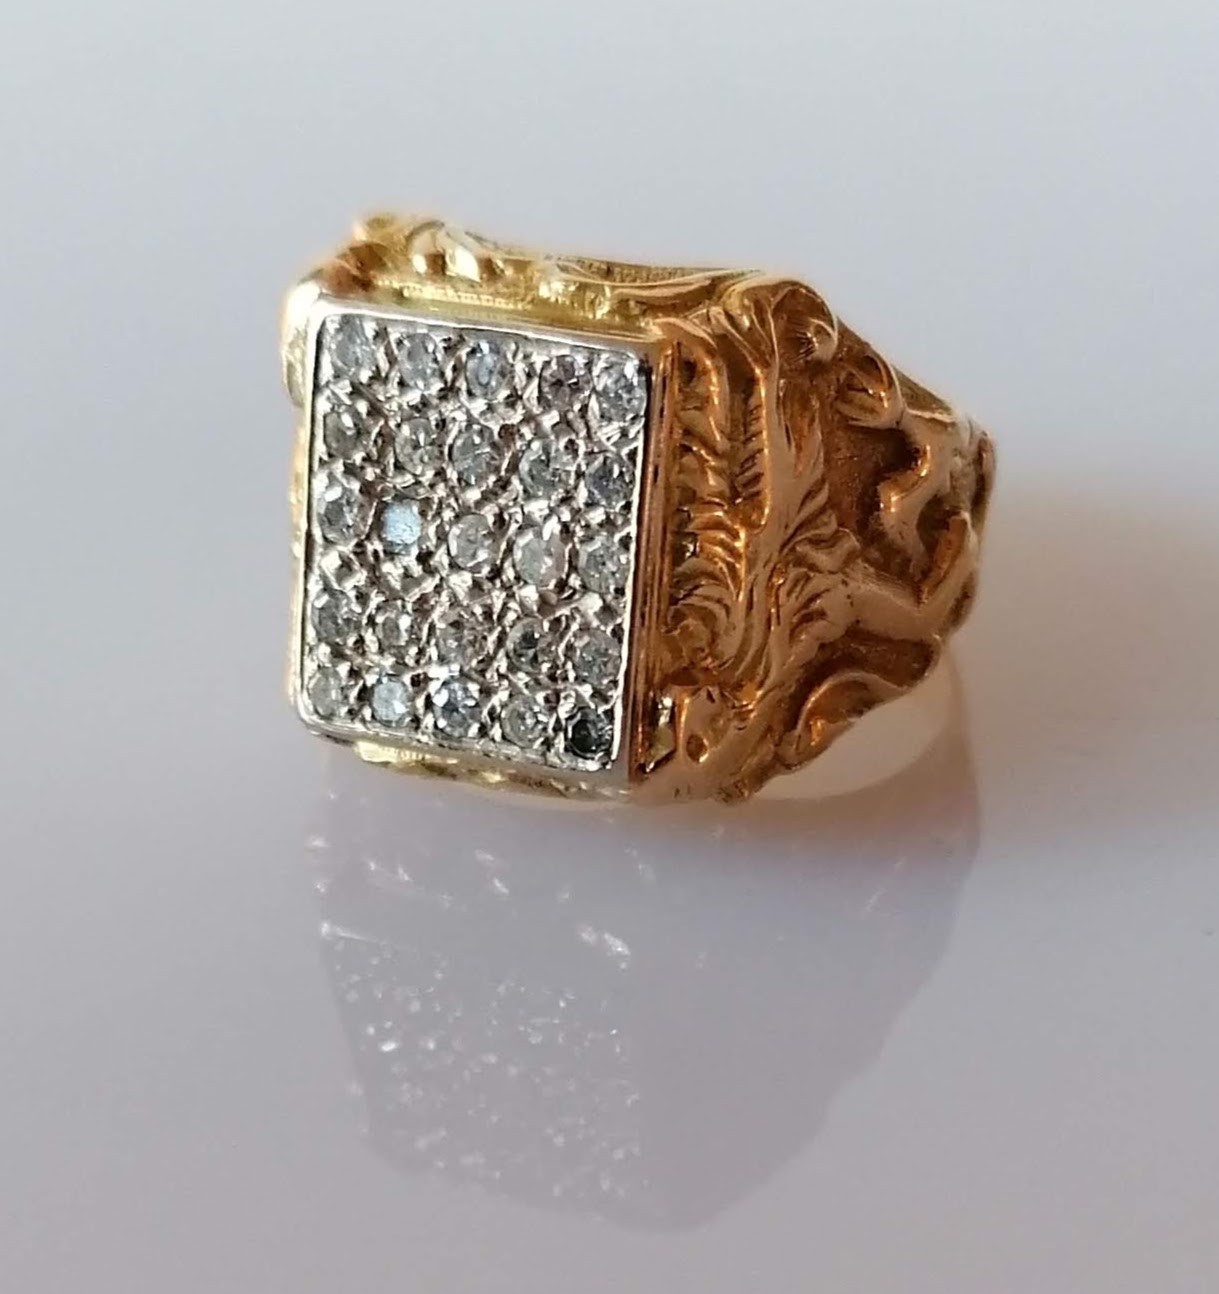 A larger yellow gold signet ring with a panel of twenty-five round-cut diamonds, each